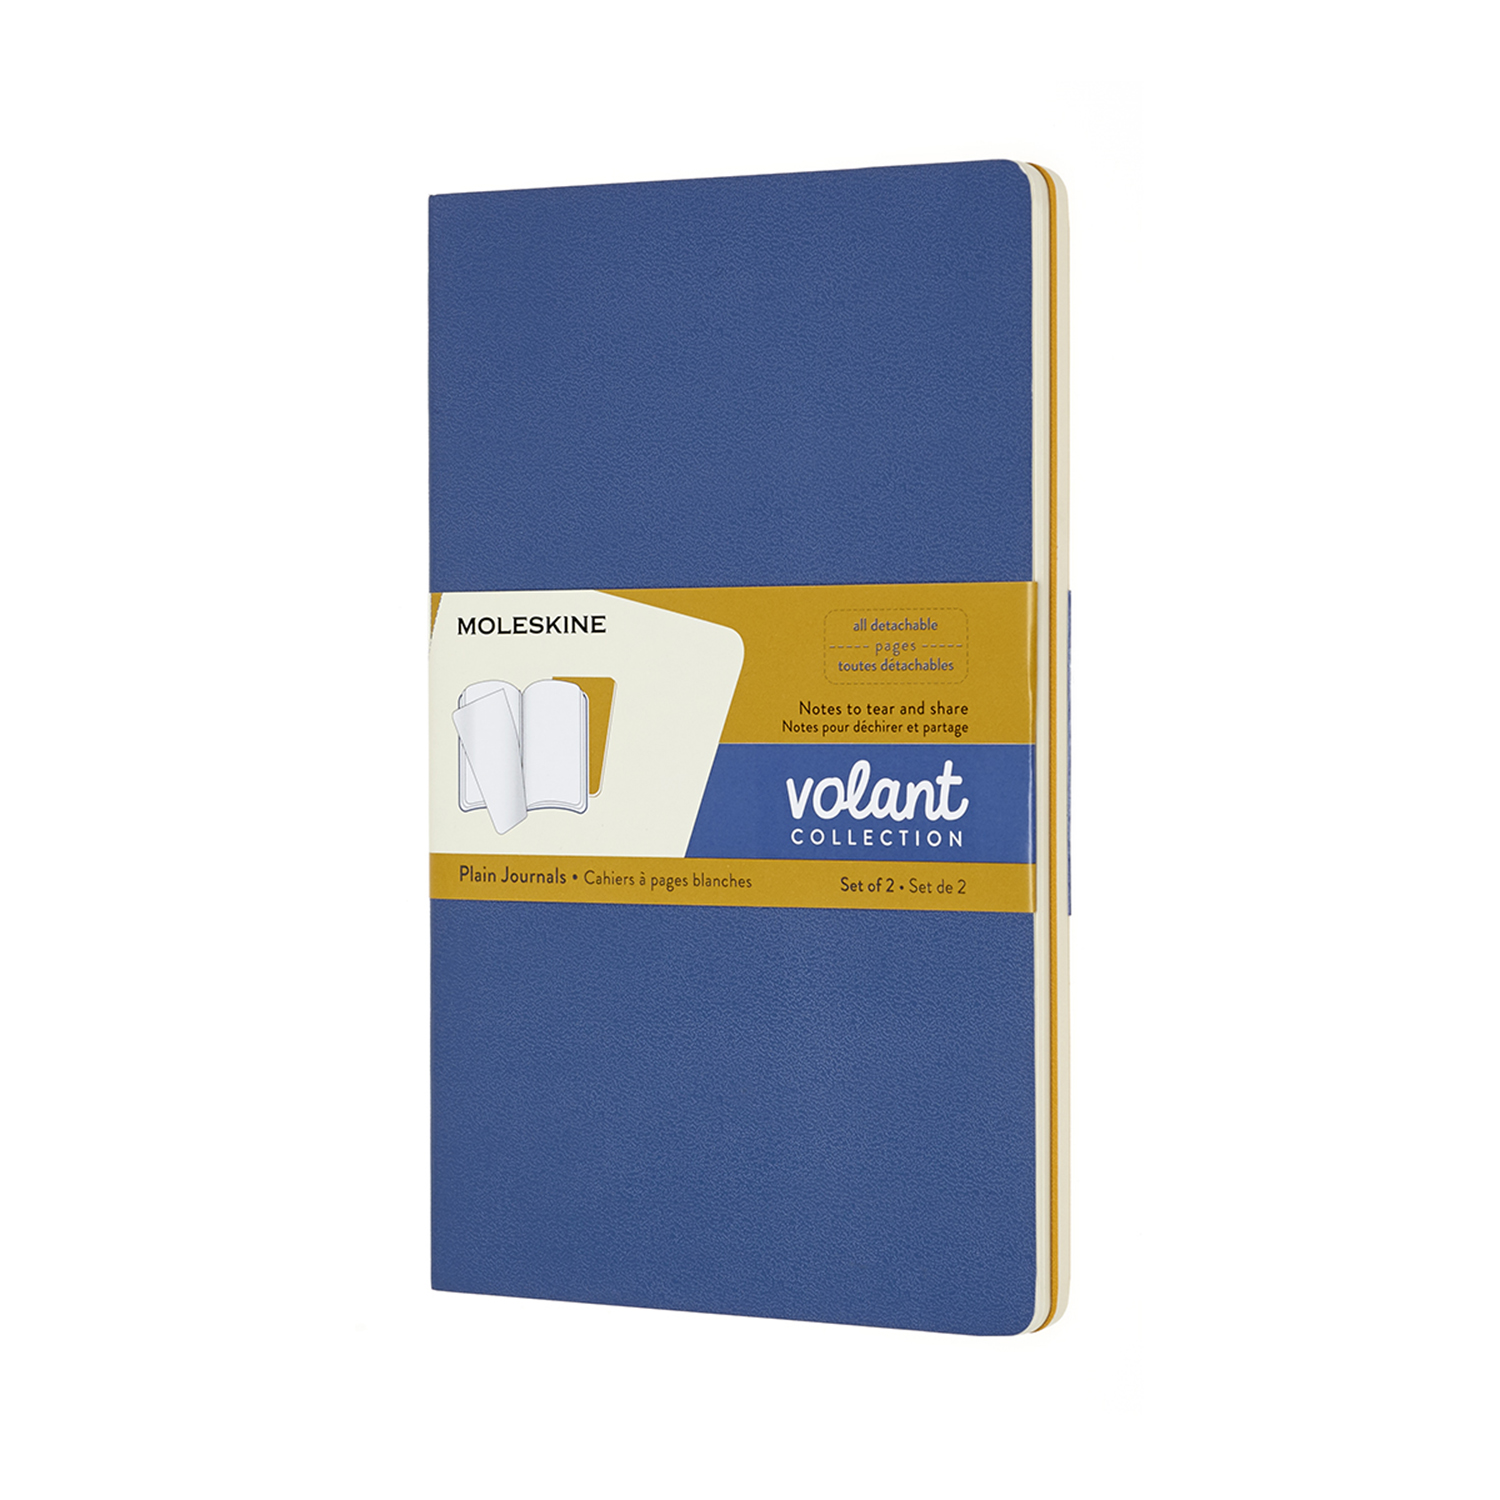 volant journal large plain forget me not blue & amber